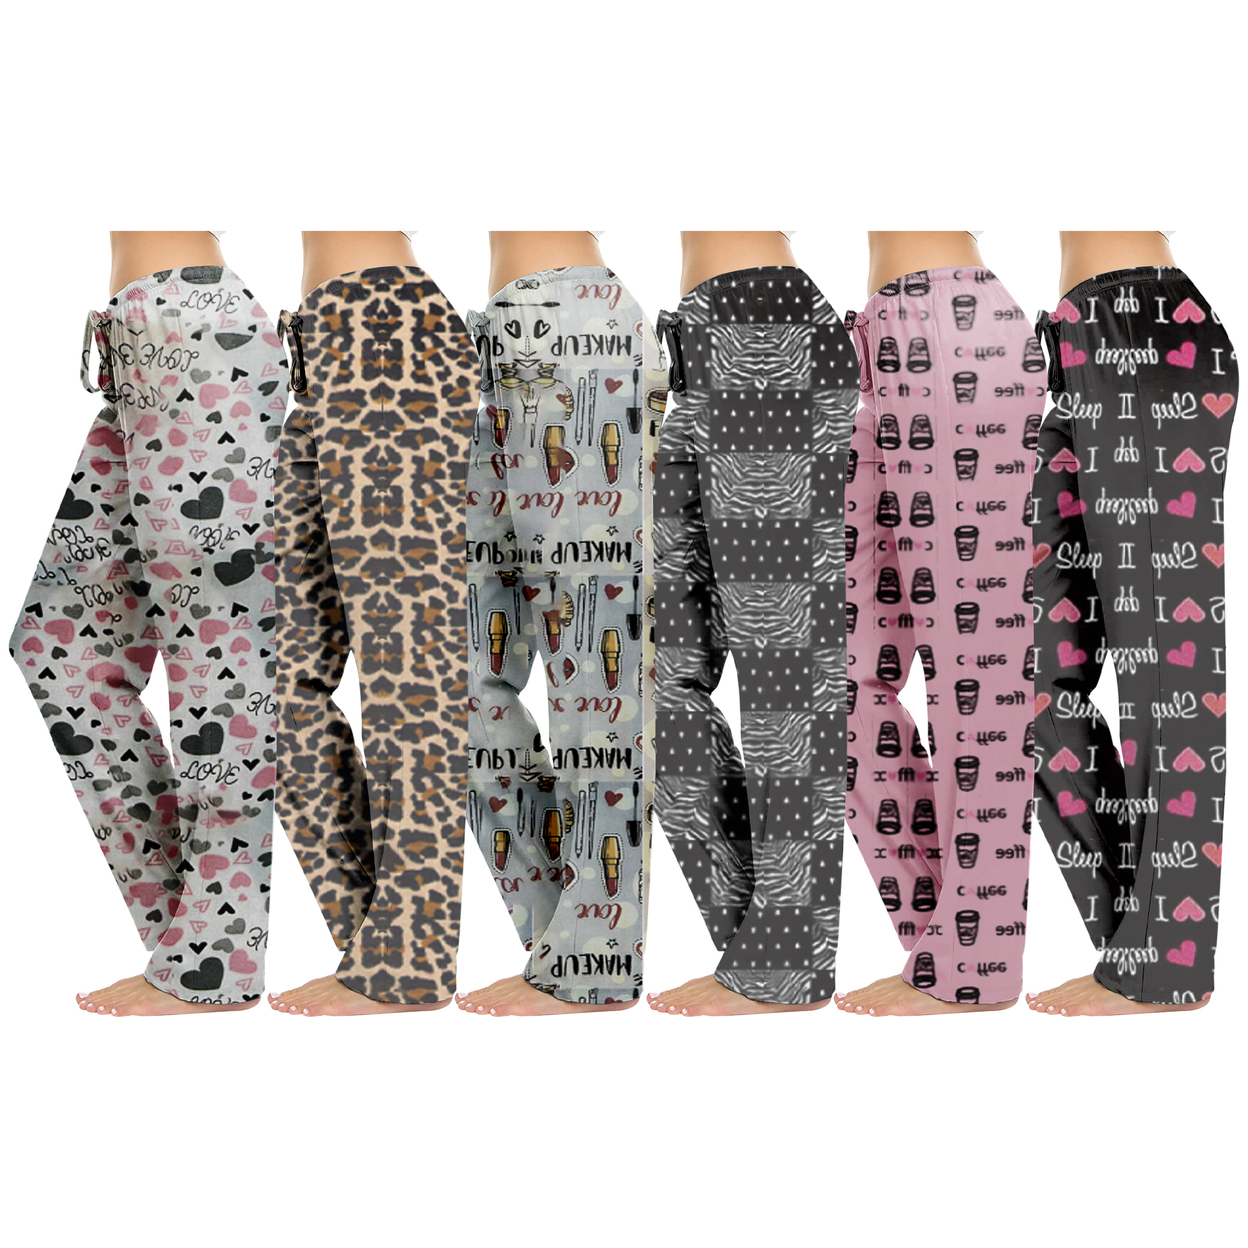 3-Pack: Women's Casual Fun Printed Lightweight Lounge Terry Knit Pajama Bottom Pants - Large, Shapes